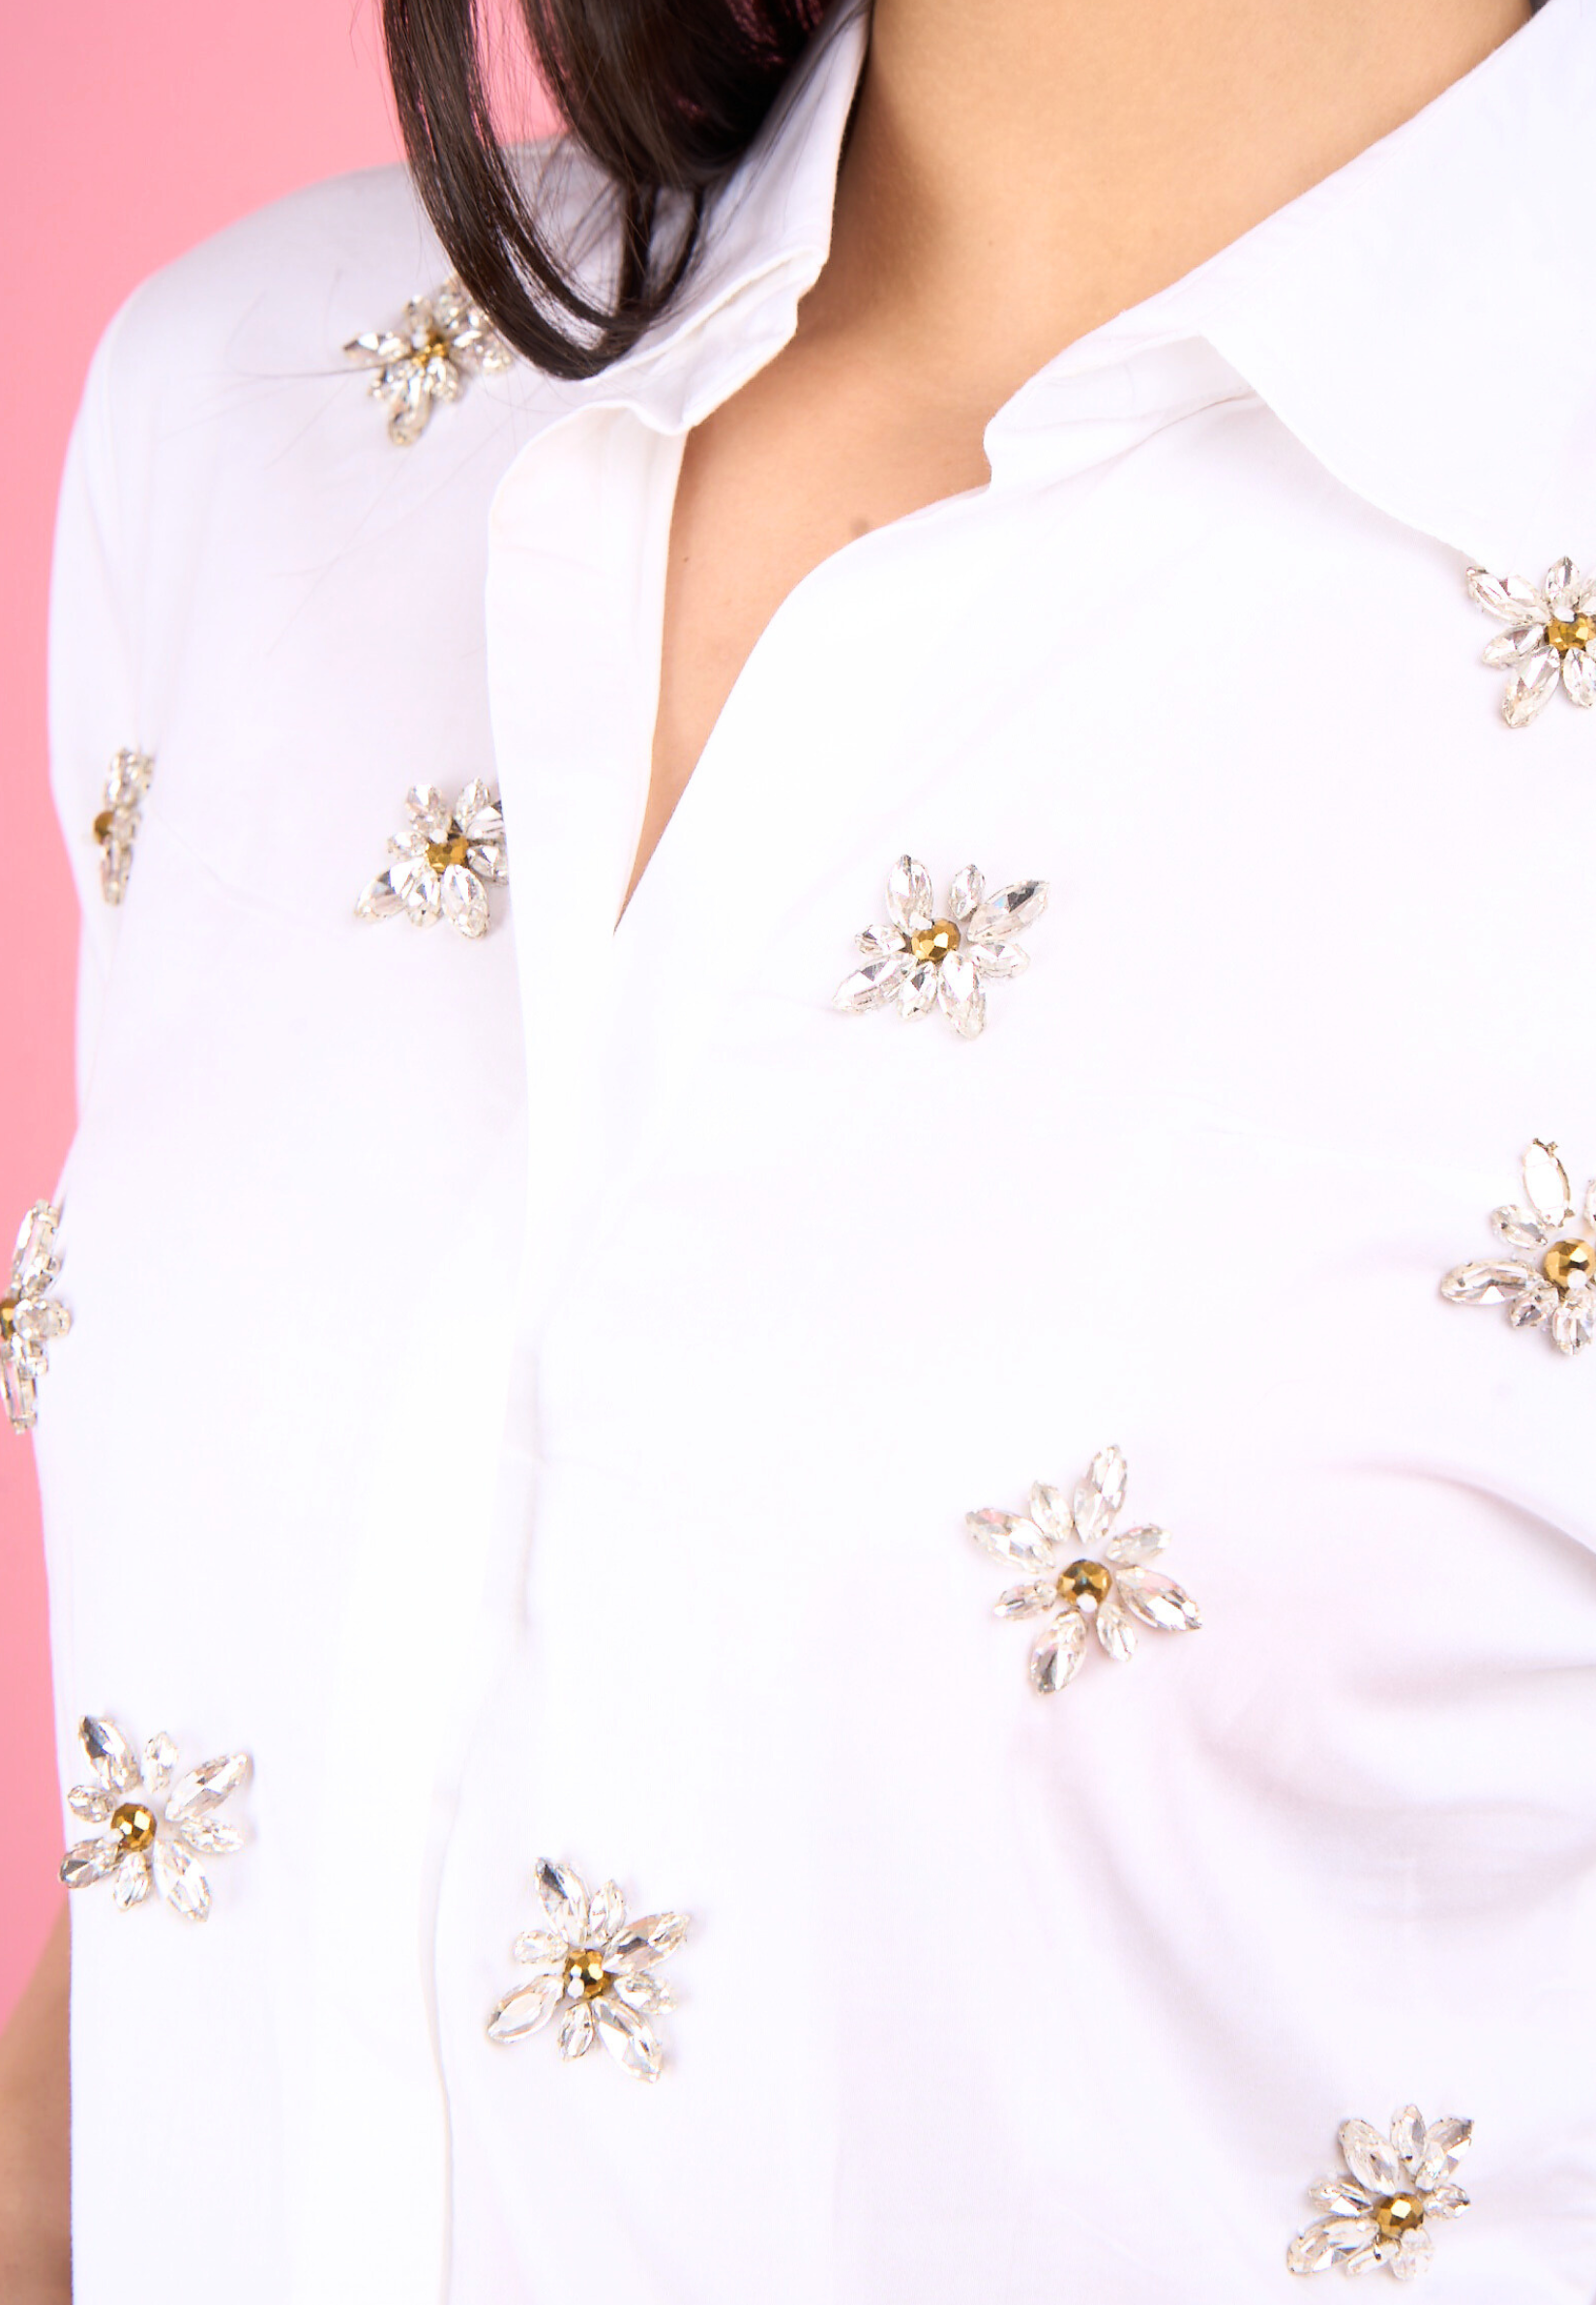 All Over Embellished Cotton Shirt (Sienna)